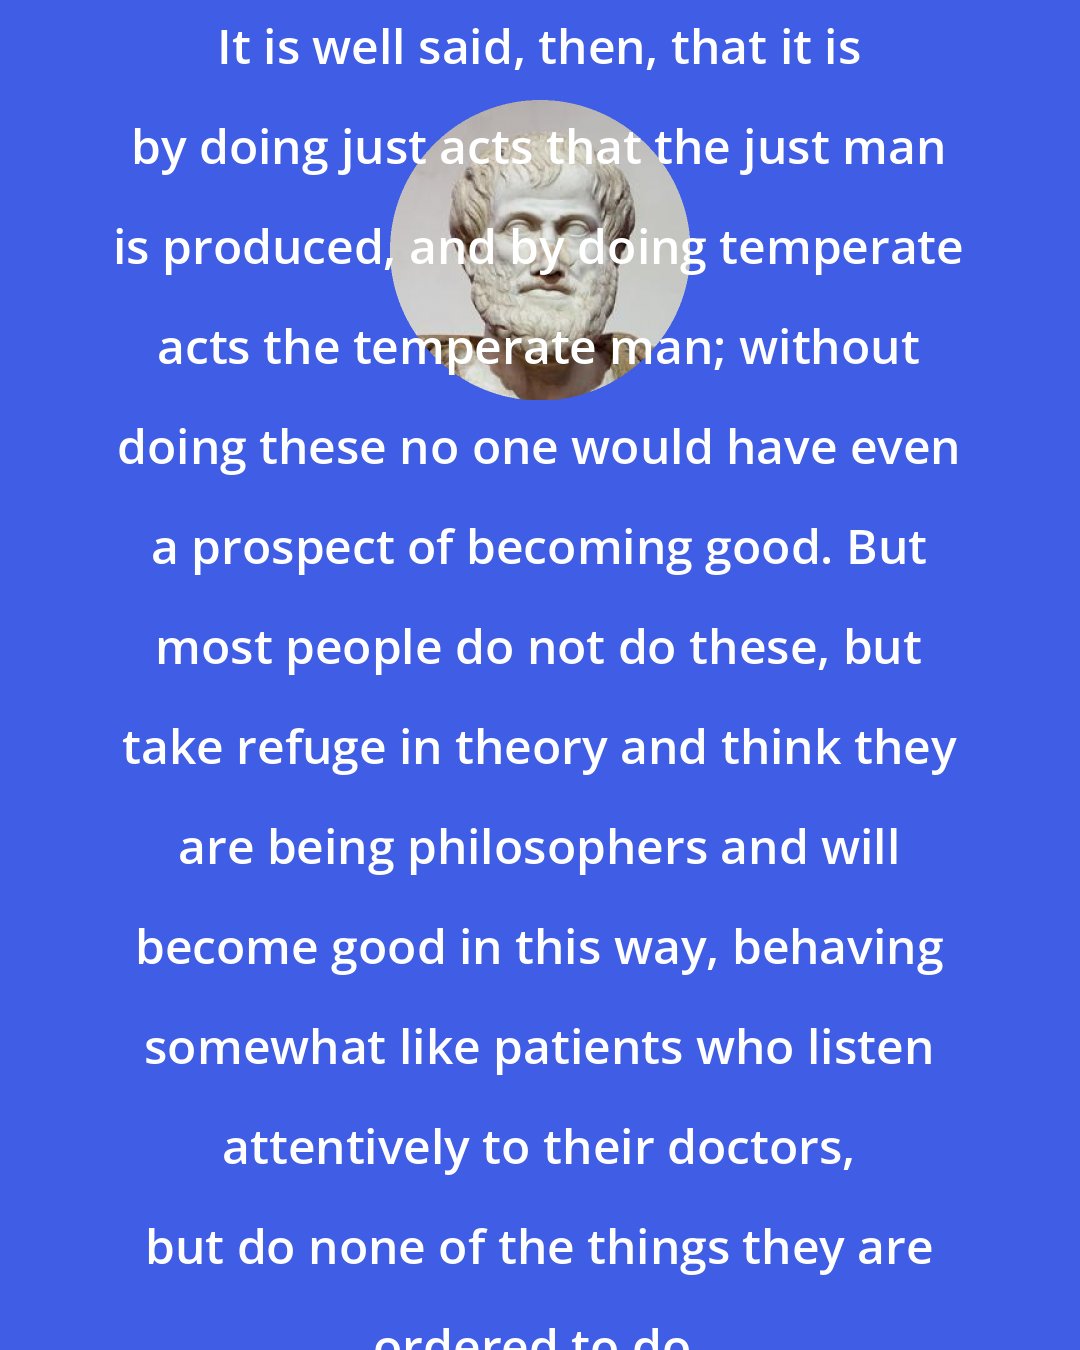 Aristotle: It is well said, then, that it is by doing just acts that the just man is produced, and by doing temperate acts the temperate man; without doing these no one would have even a prospect of becoming good. But most people do not do these, but take refuge in theory and think they are being philosophers and will become good in this way, behaving somewhat like patients who listen attentively to their doctors, but do none of the things they are ordered to do.